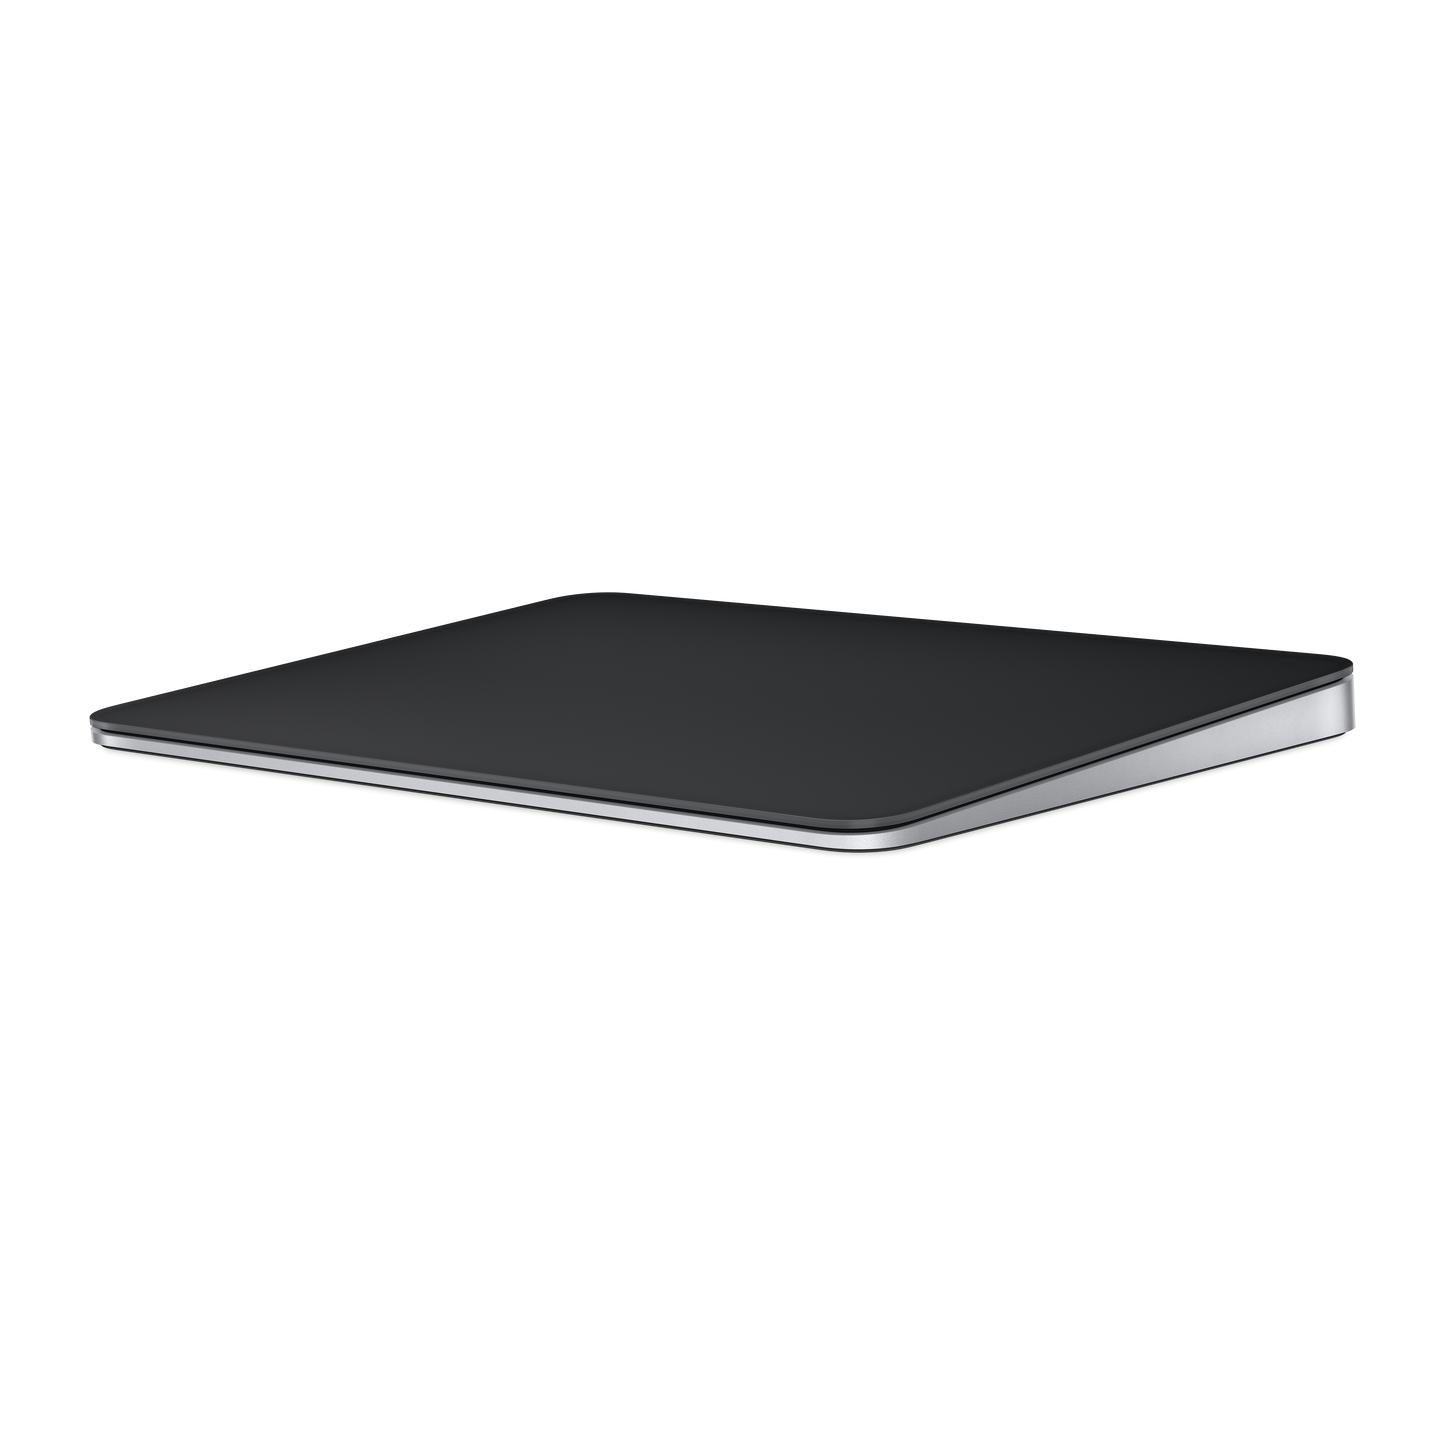 Apple Magic Trackpad - Black Multi-Touch Surface at Rs 14500/piece